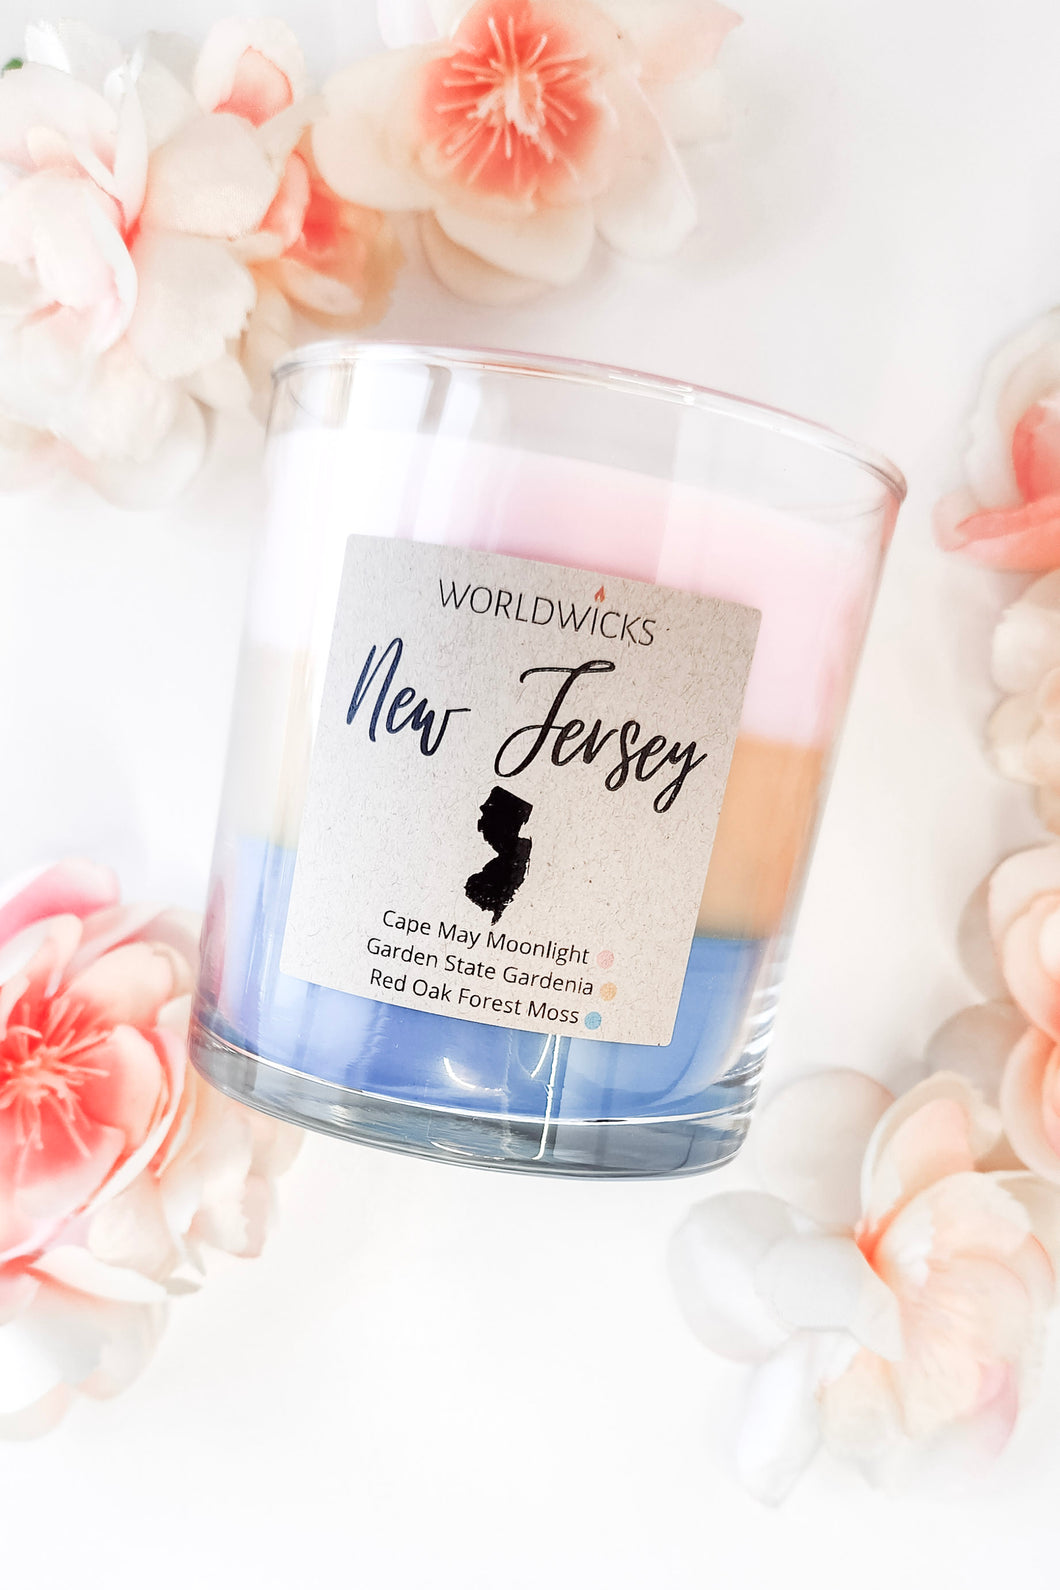 New Jersey Triple Scented Candle